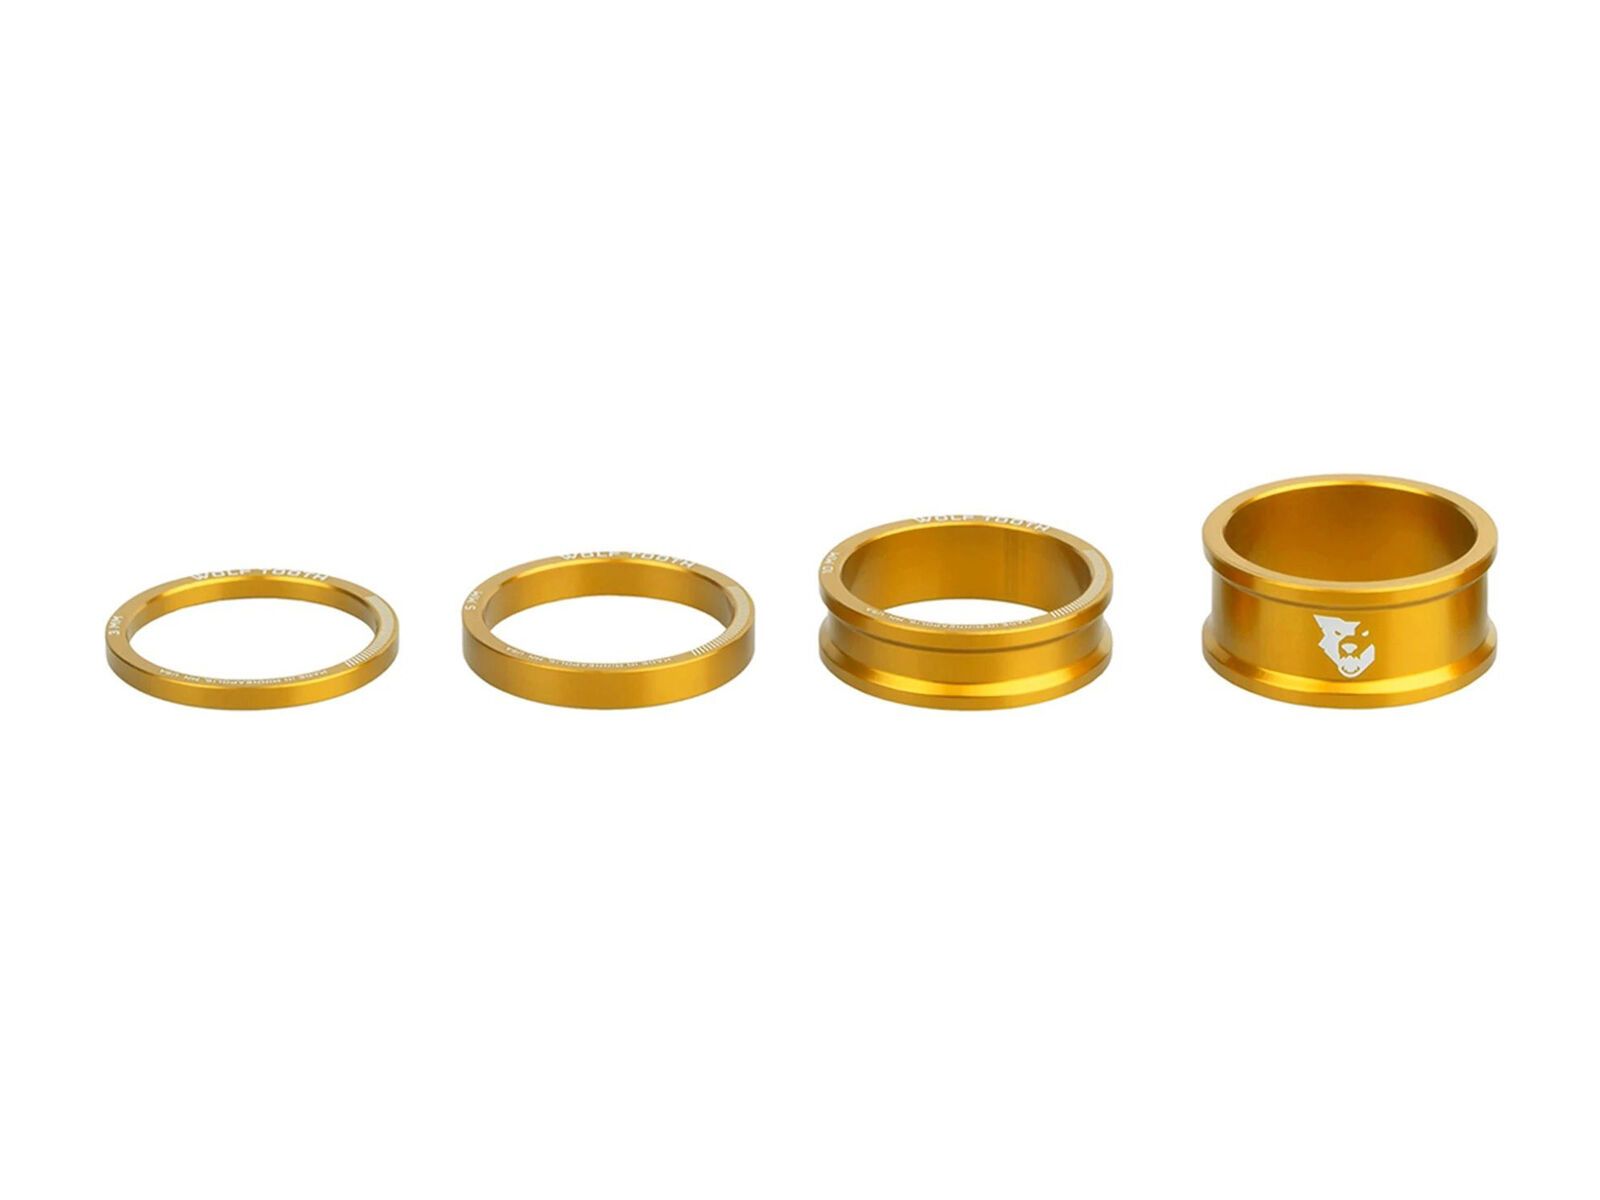 Wolf Tooth Precision Headset Spacers - 3/5/10/15 mm Kit gold SPACER-GLD-KIT1